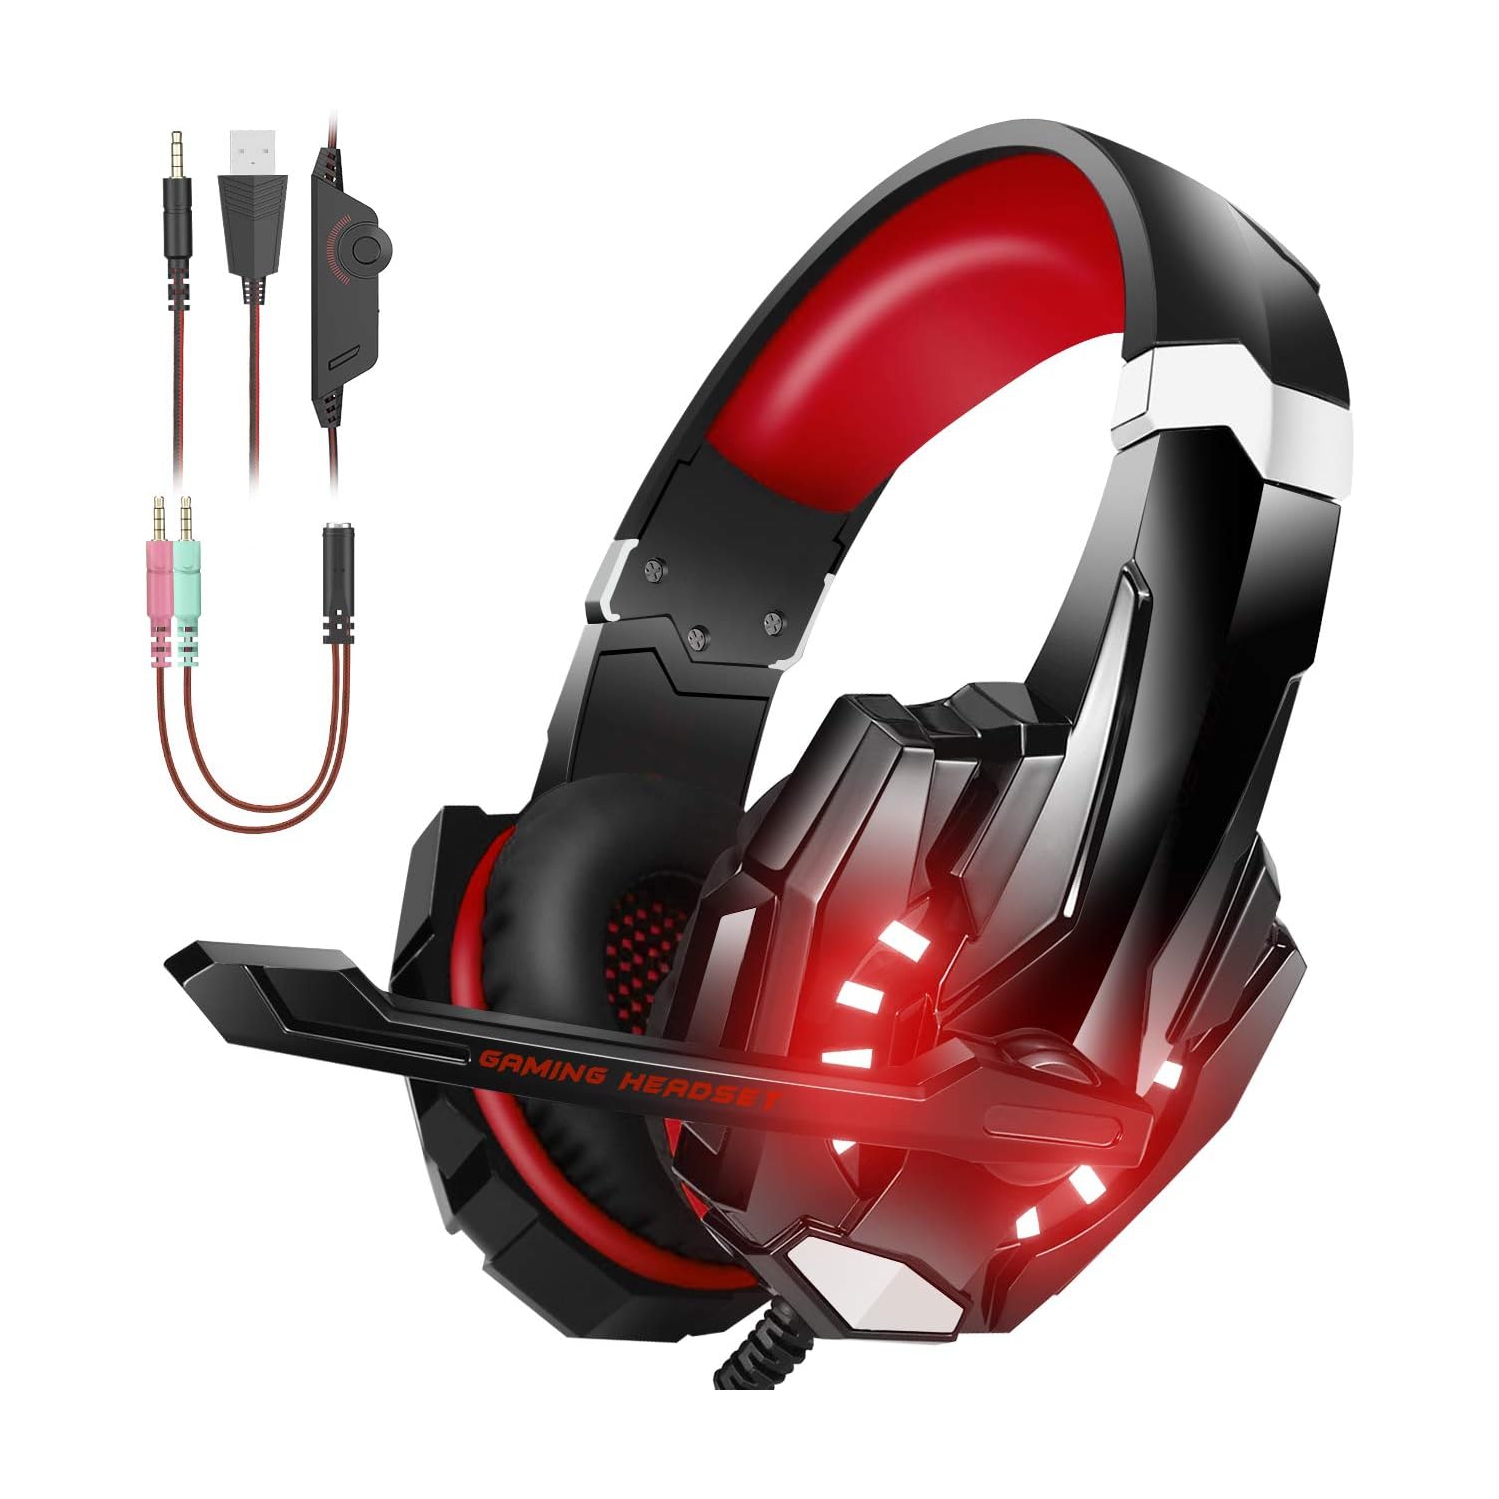 Stereo Headset for PS4, PC, Xbox One Controller, Noise Cancelling Over Ear Headphones with Mic, LED Light, Soft Memory Earmuffs for Laptop Mac Nintendo Switch Games (Red)